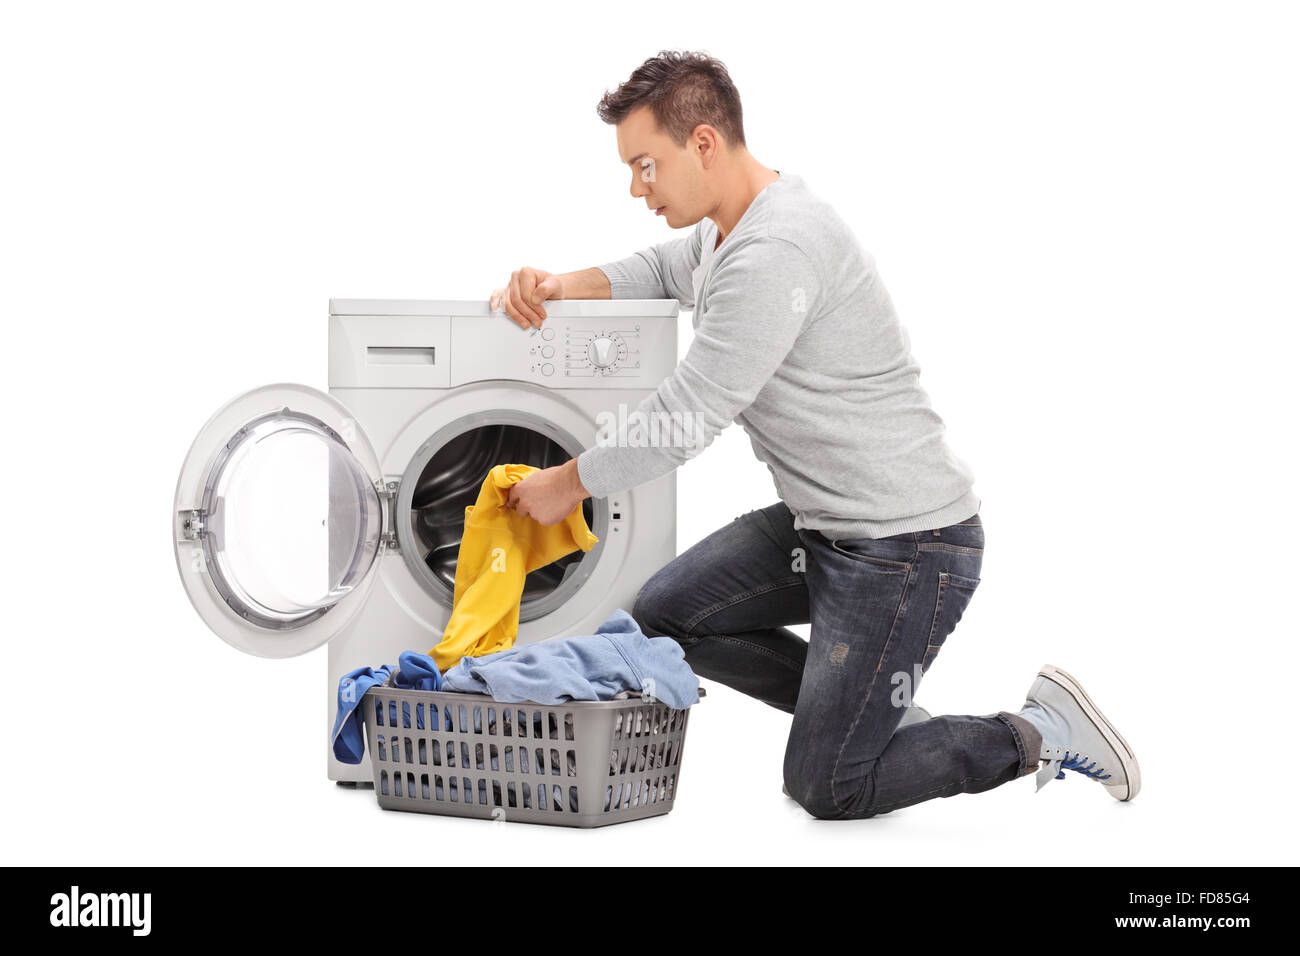 Studio shot of a young man putting clothes in a washing machine isolated on white background Stock Photo